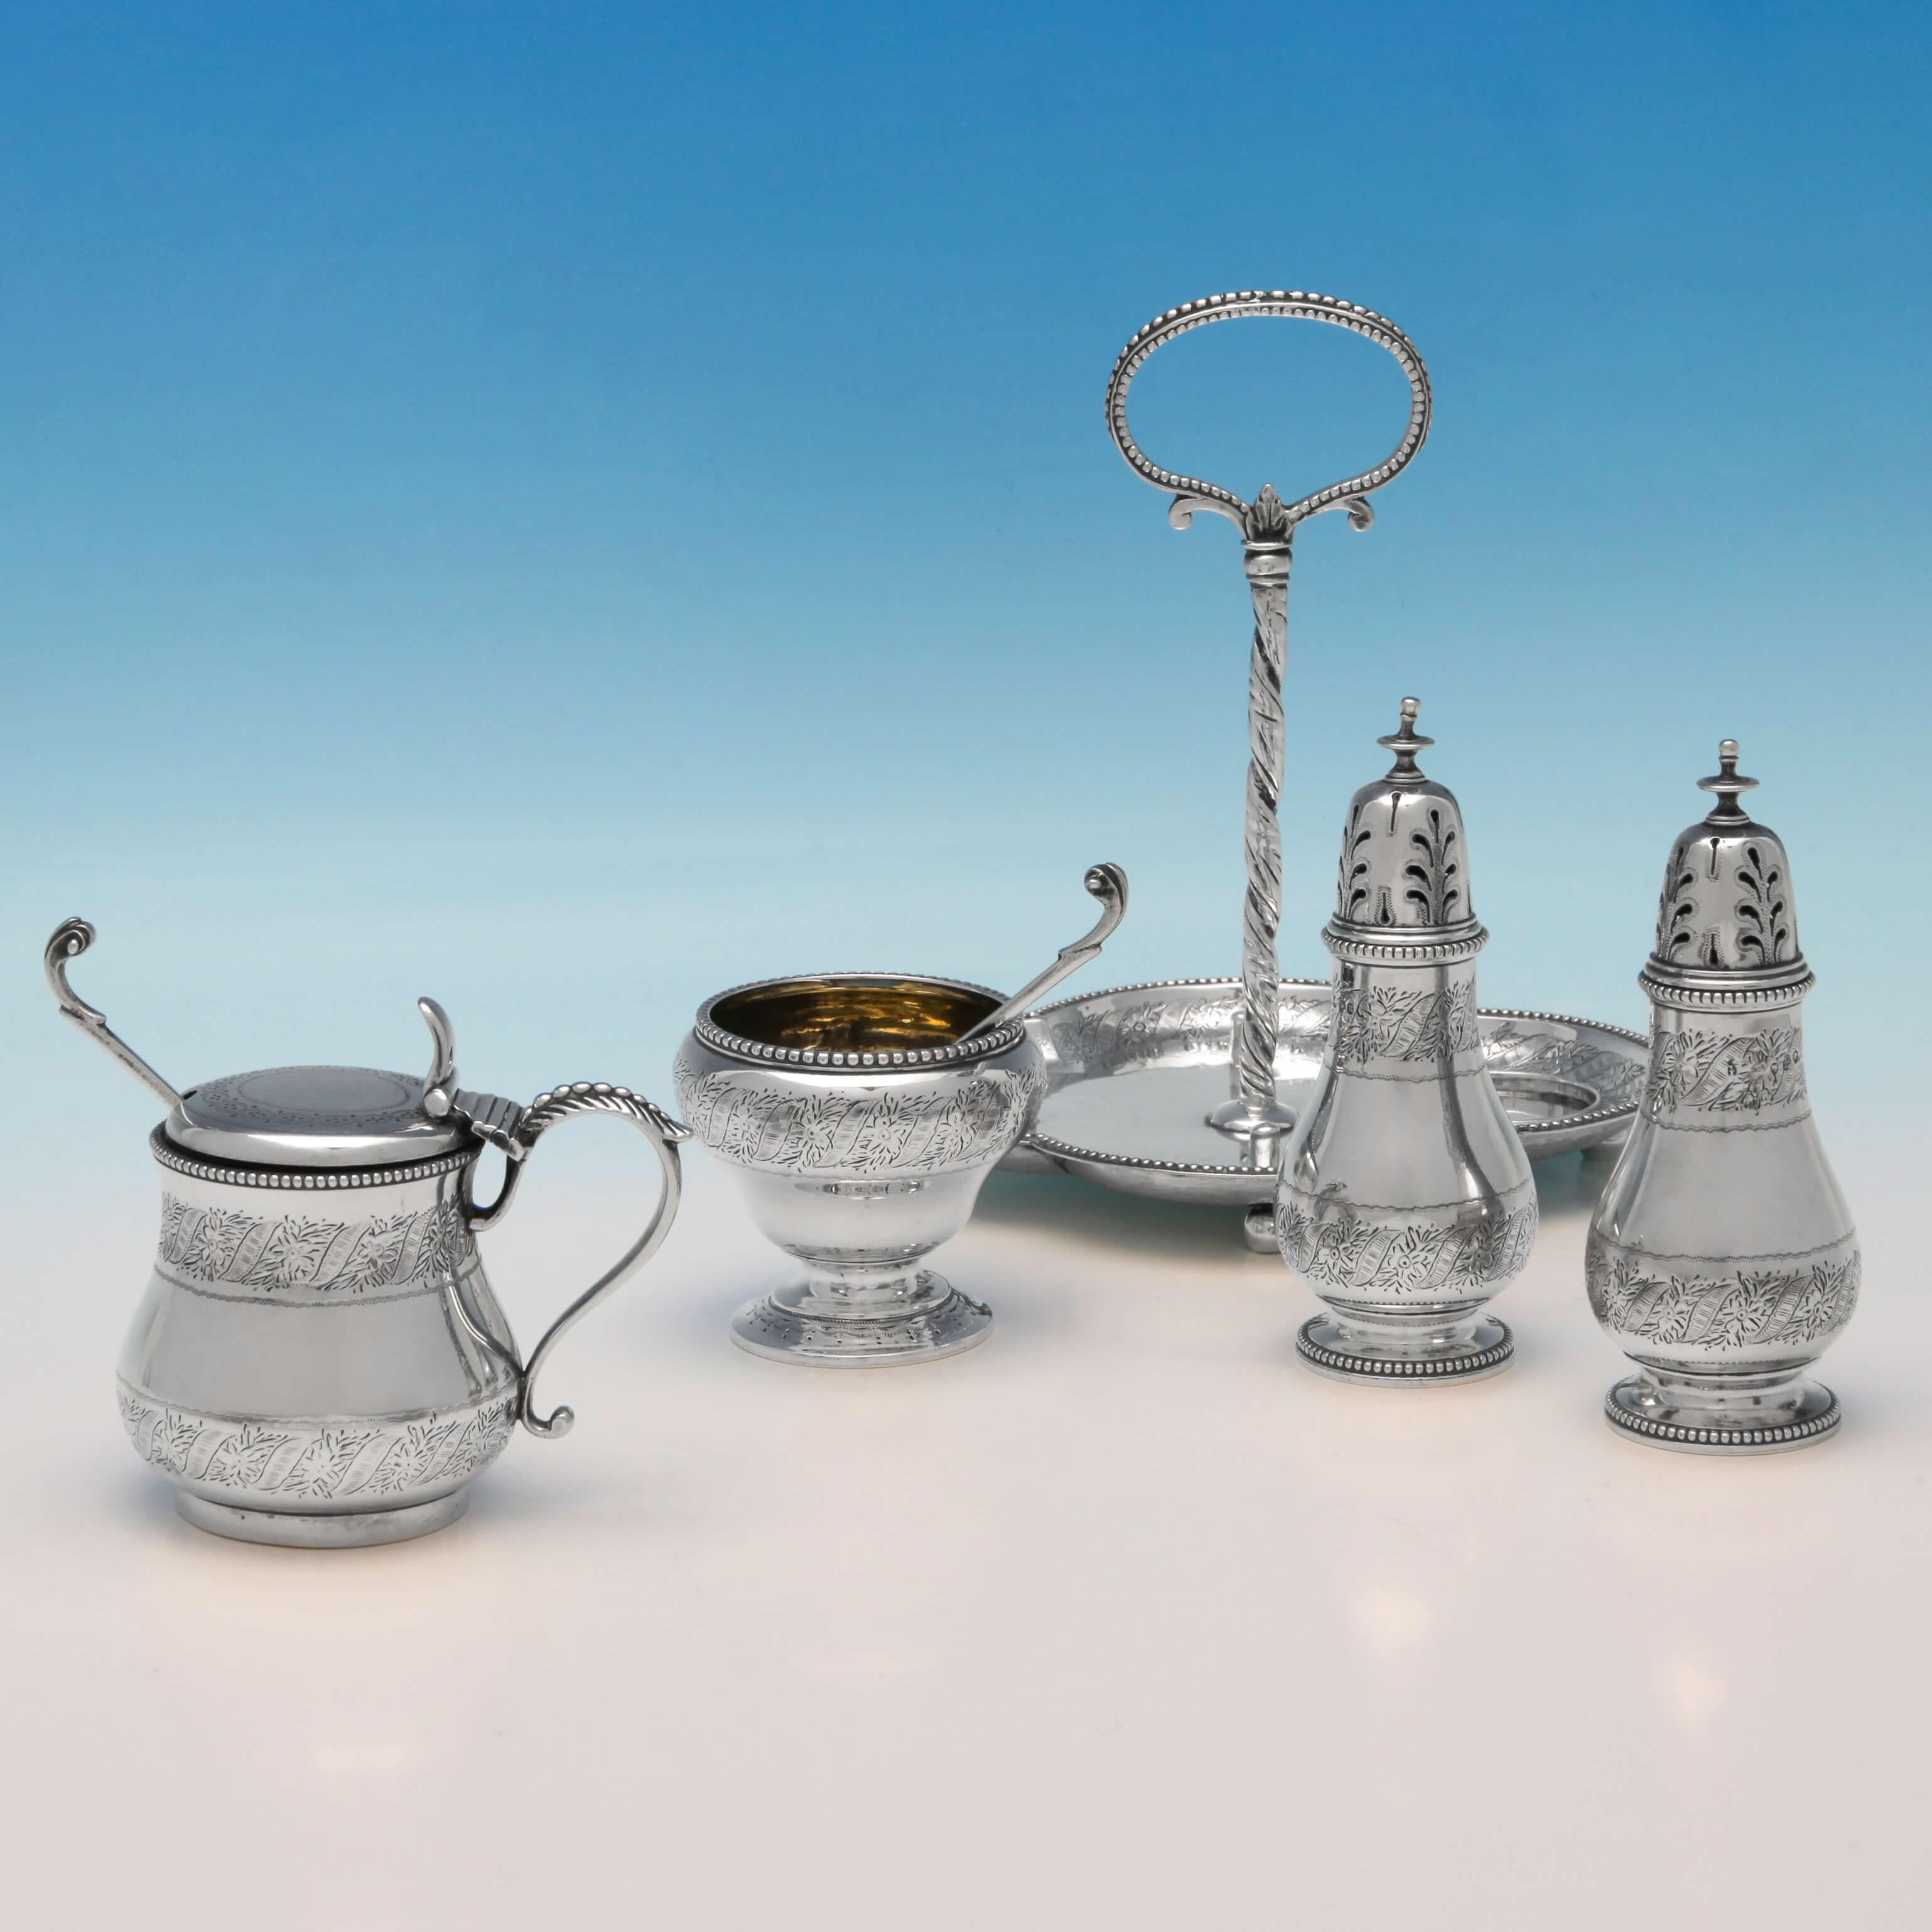 Hallmarked in London in 1868 by George Fox, this very attractive, Victorian, Antique Sterling Silver Condiment Set, comprises a mustard pot, salt cellar, two spoons and two pepper pots, all featuring bright cut engraved decoration, and bead borders.